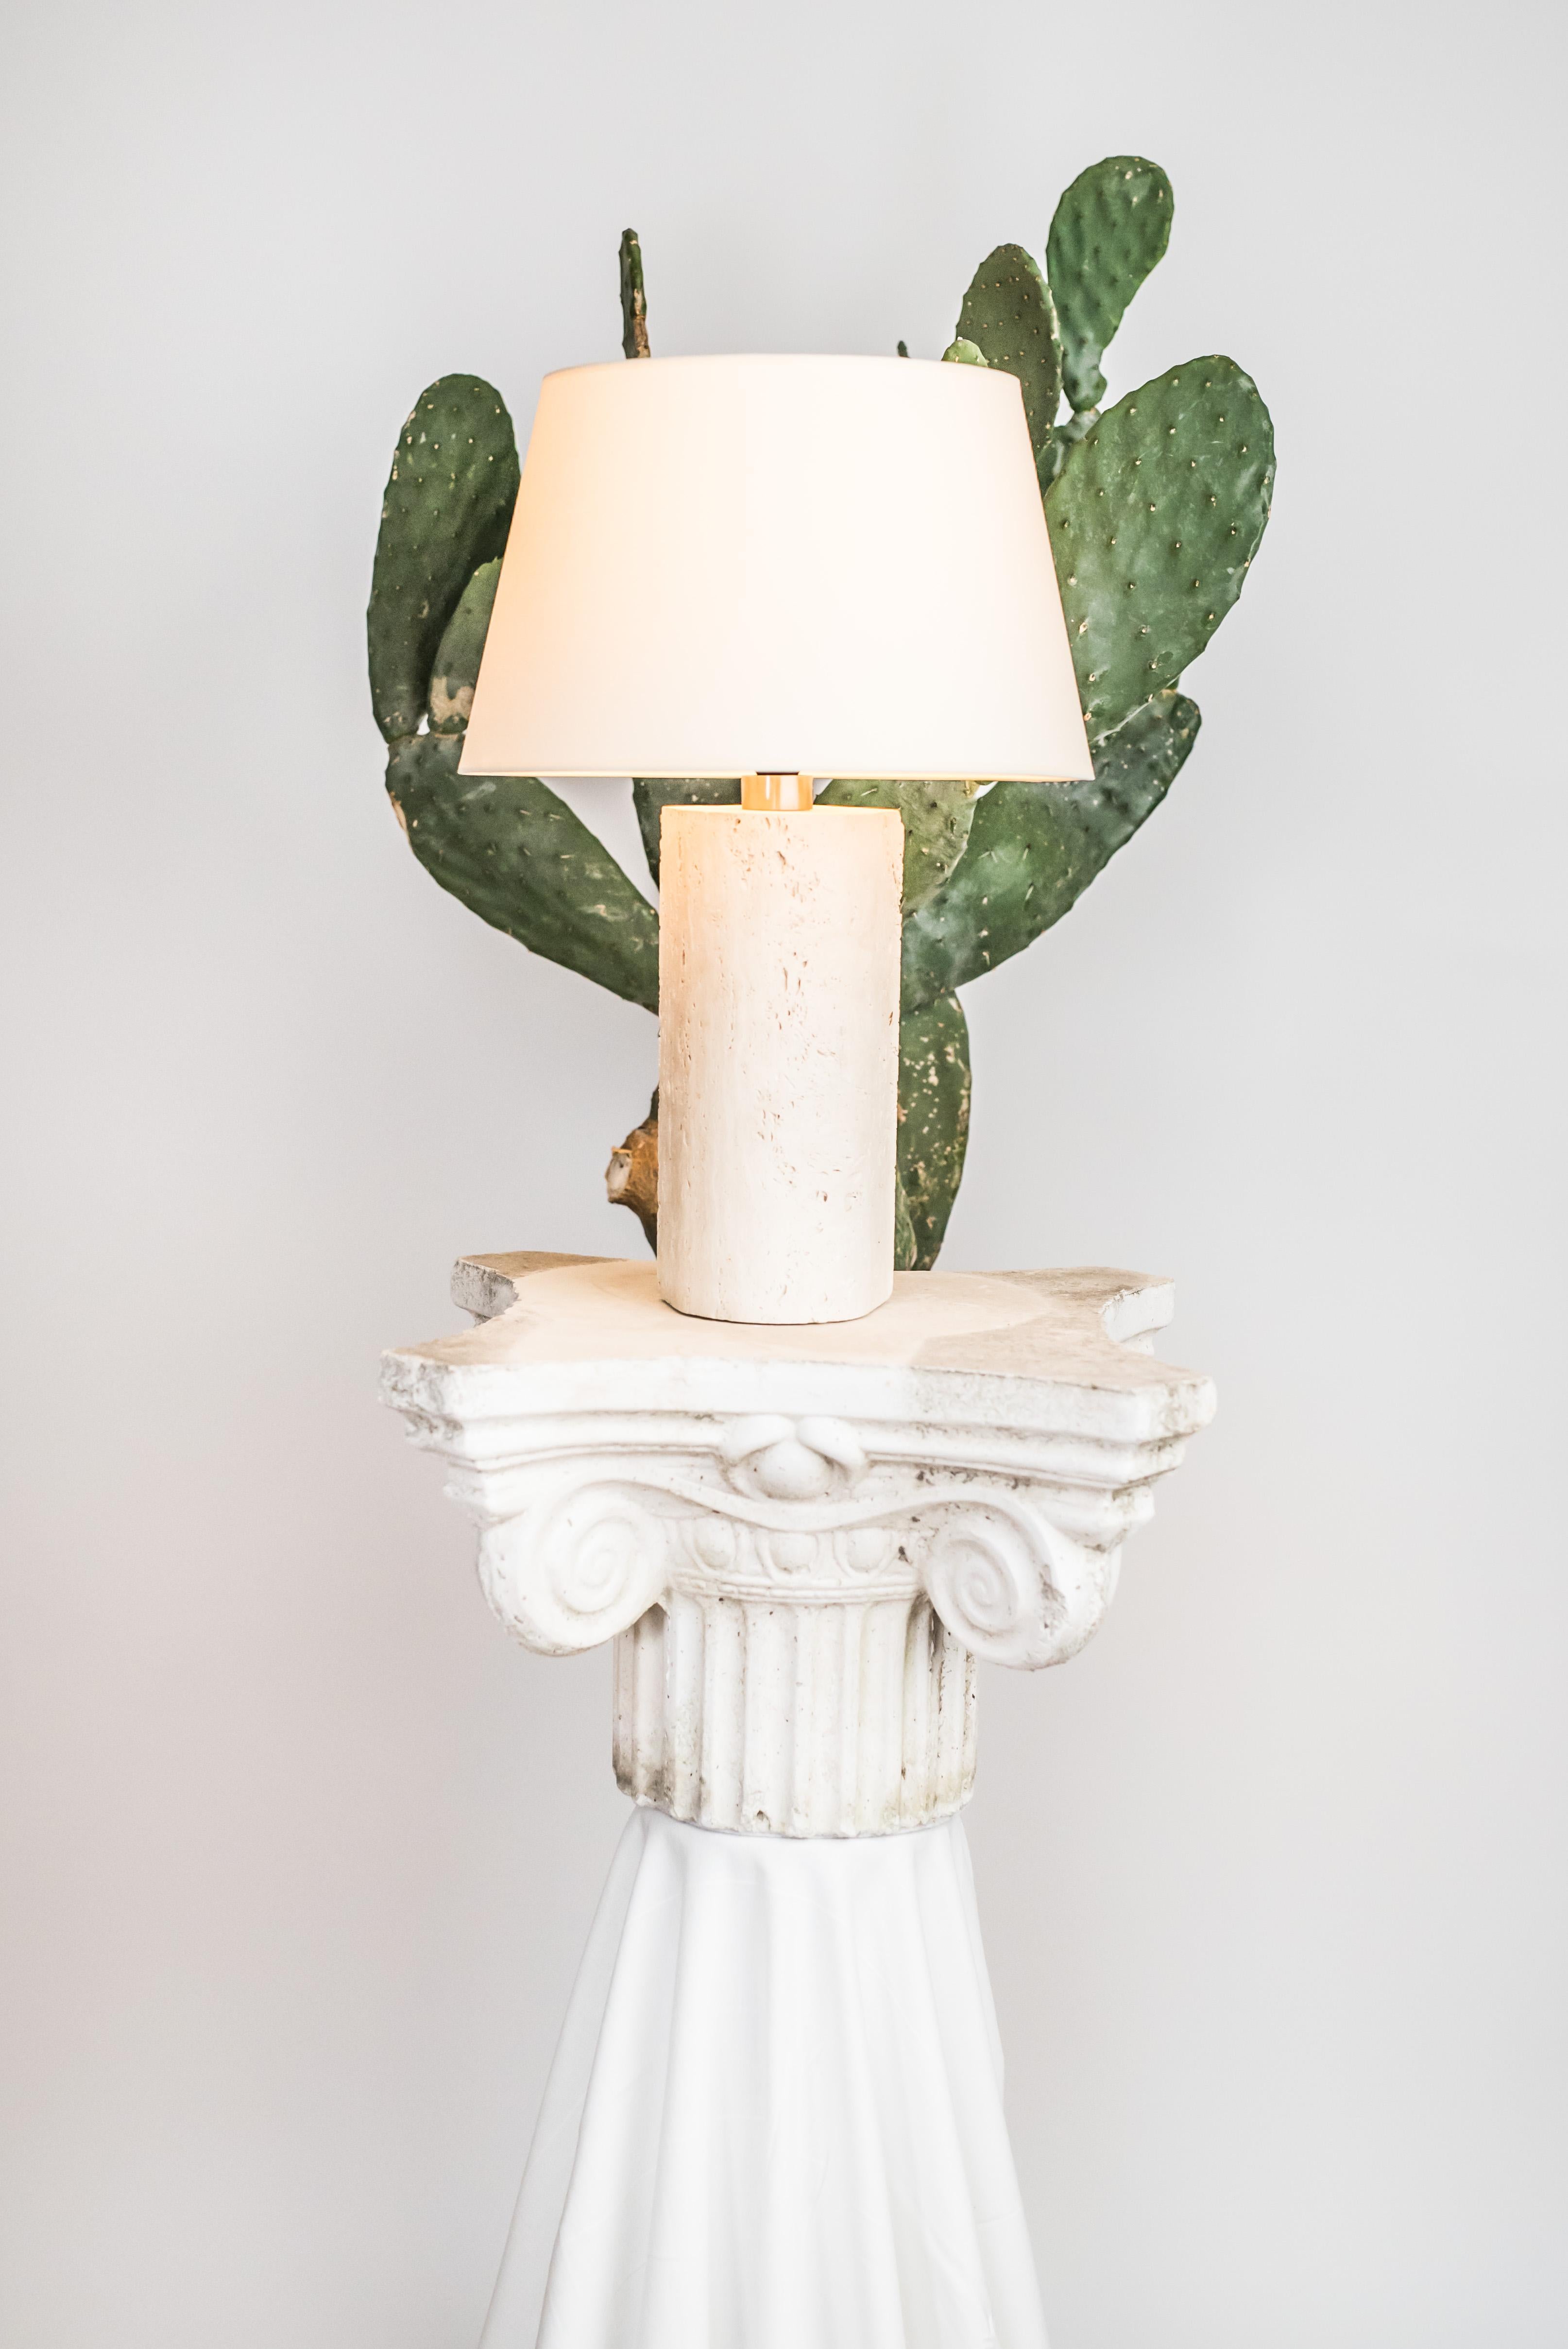 Travertine sculpted table lamp by Brajak Vitberg
CAPRI 1.2.
Travertine, Polished brass
Dimensions: 52 x 35 x 35 cm
white or black cotton lampshade, cotton wiring


Bijelic and Brajak are two architects from Ljubljana, Slovenia.
They are striving to